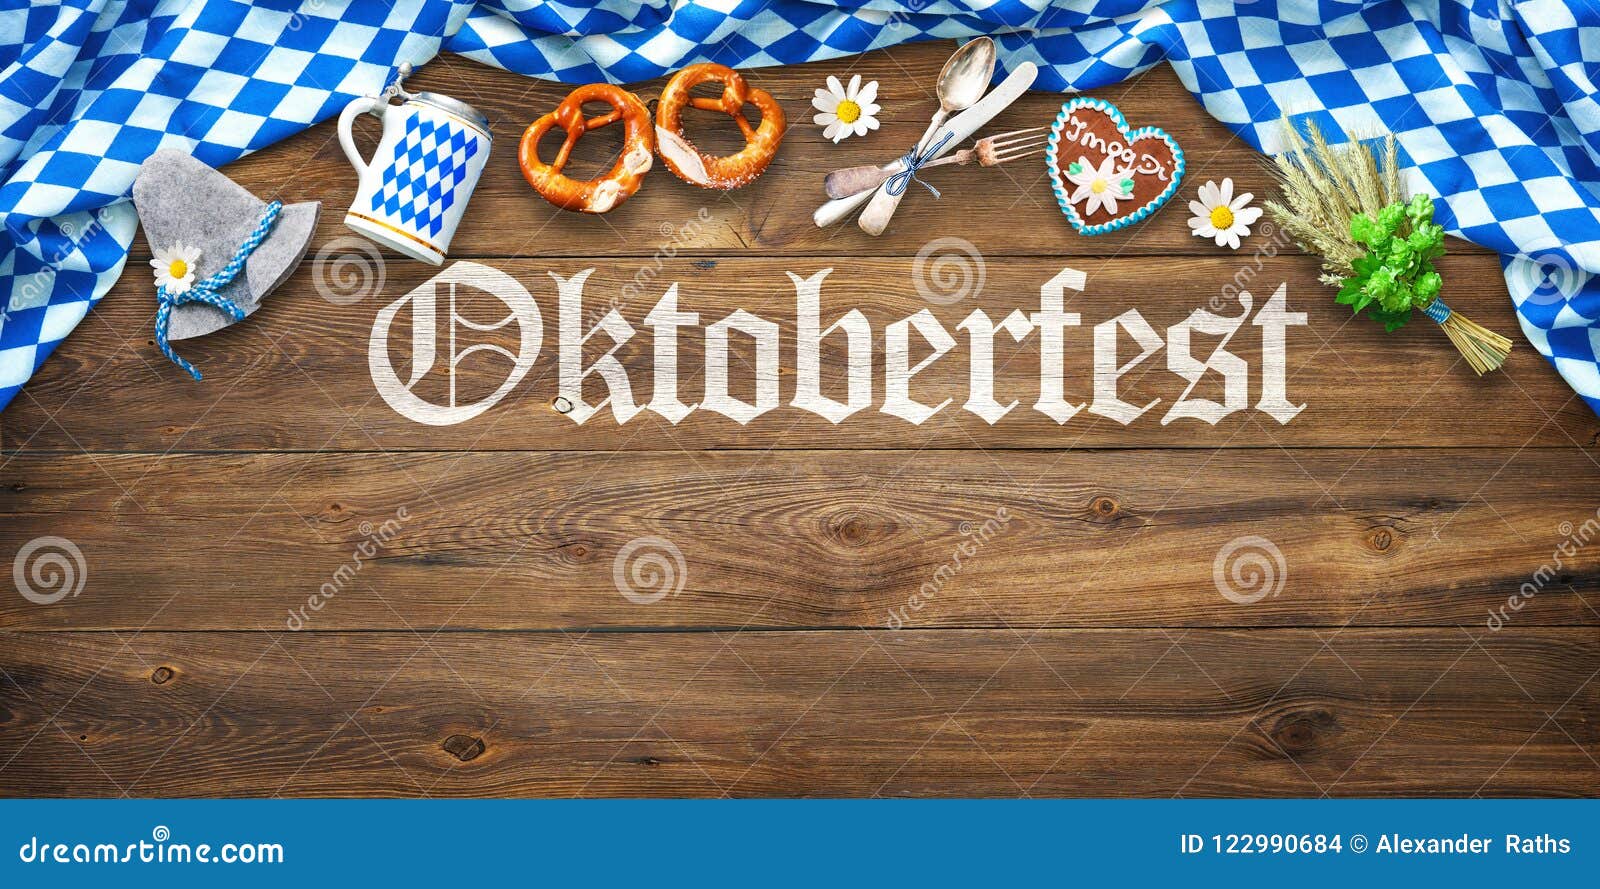 Rustic Background For Oktoberfest Stock Photo Image Of Edelweiss Decoration